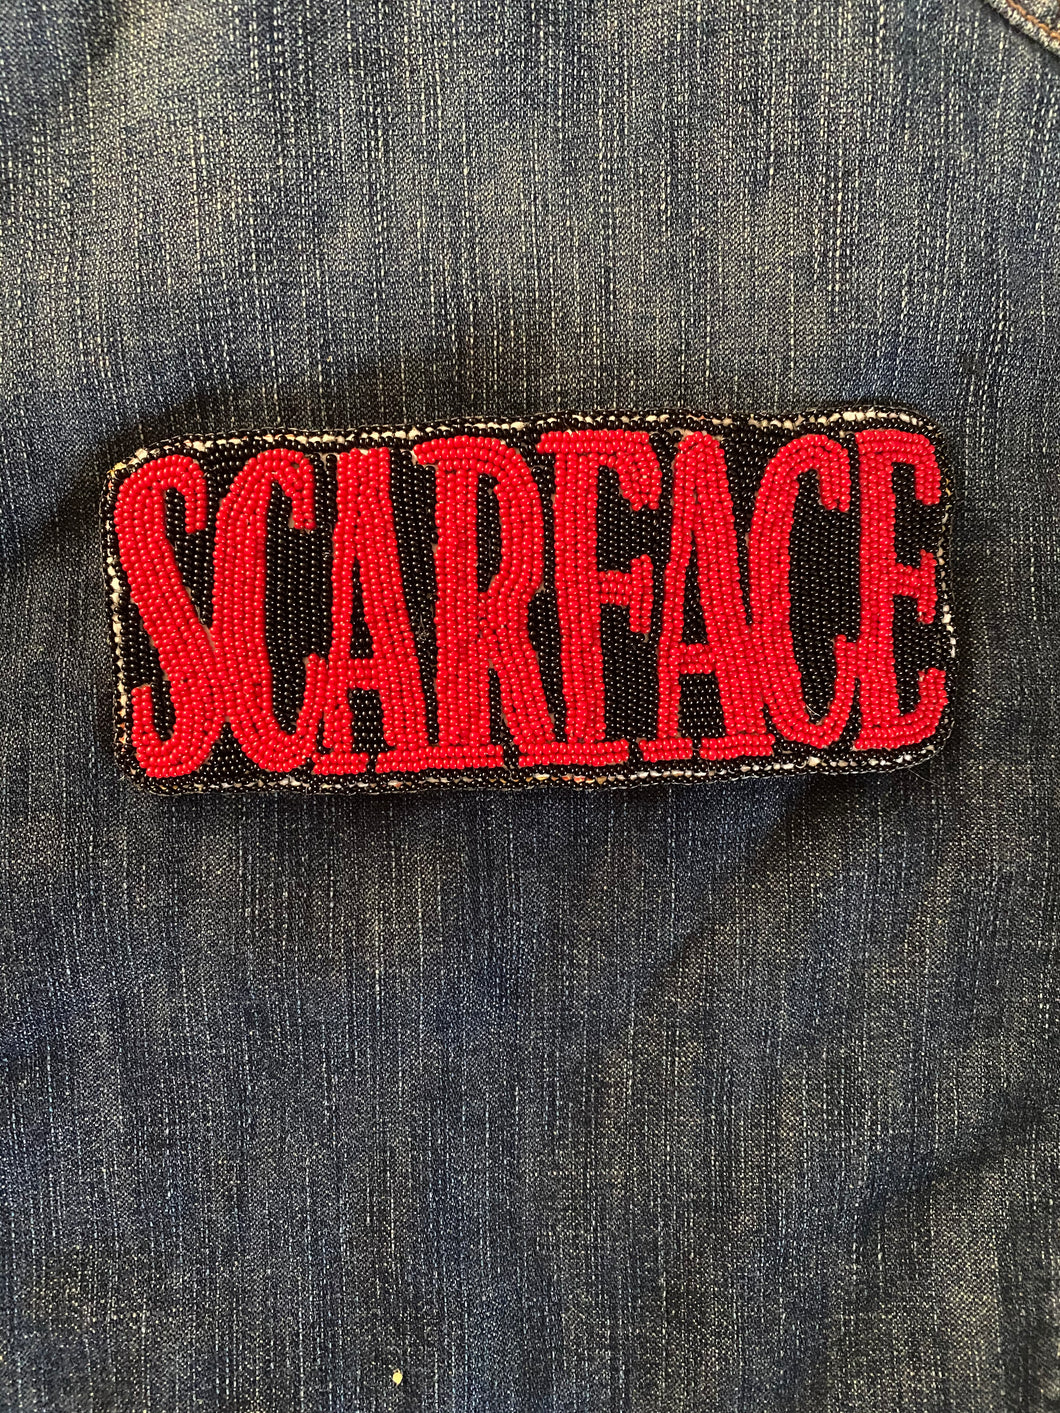 Scarface beaded patch